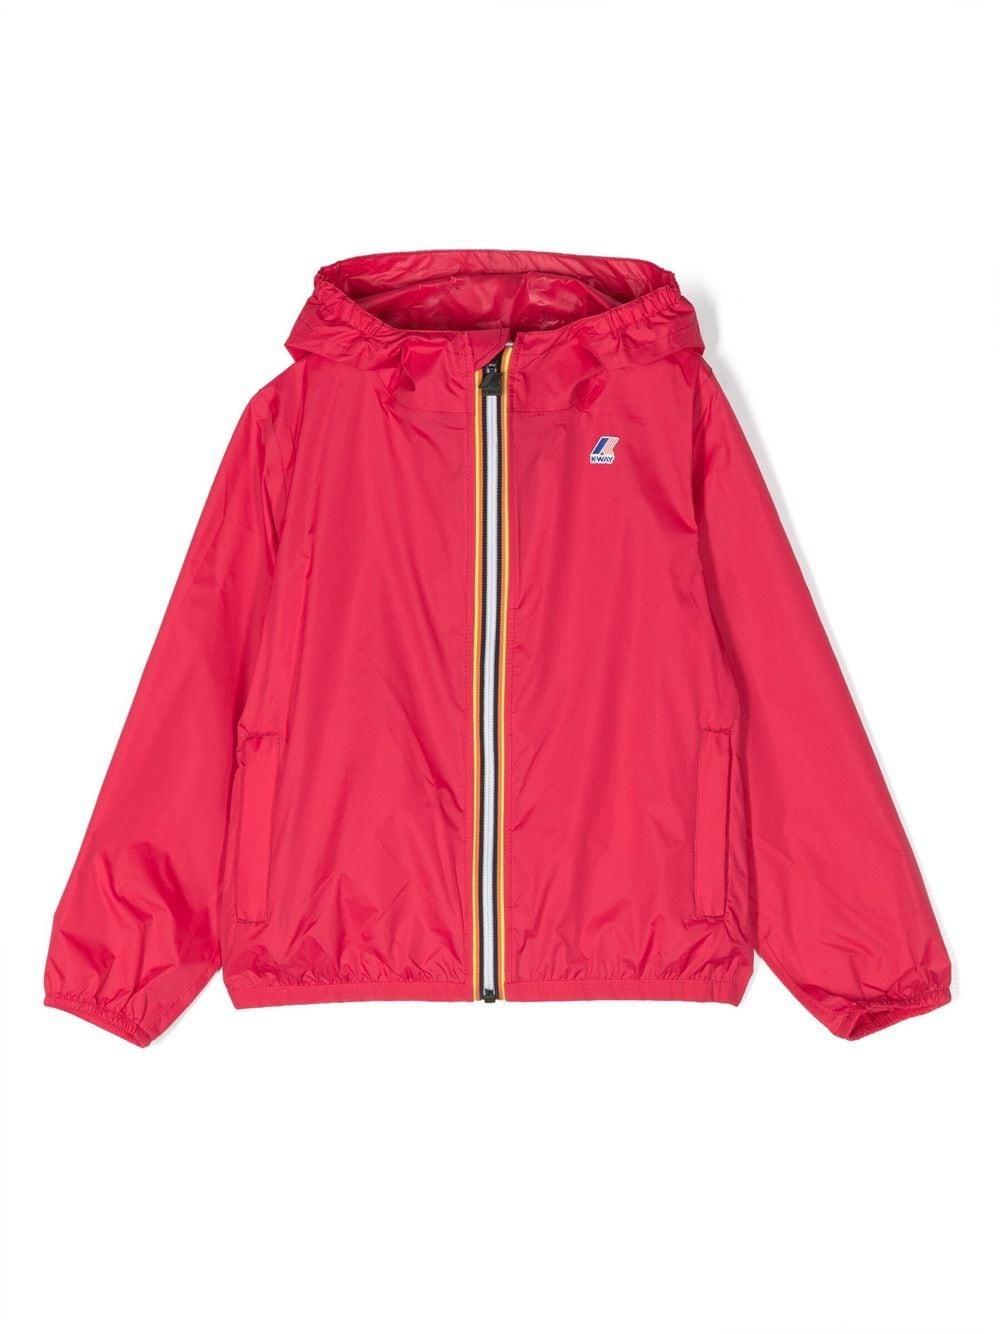 Red jacket for boys with logo